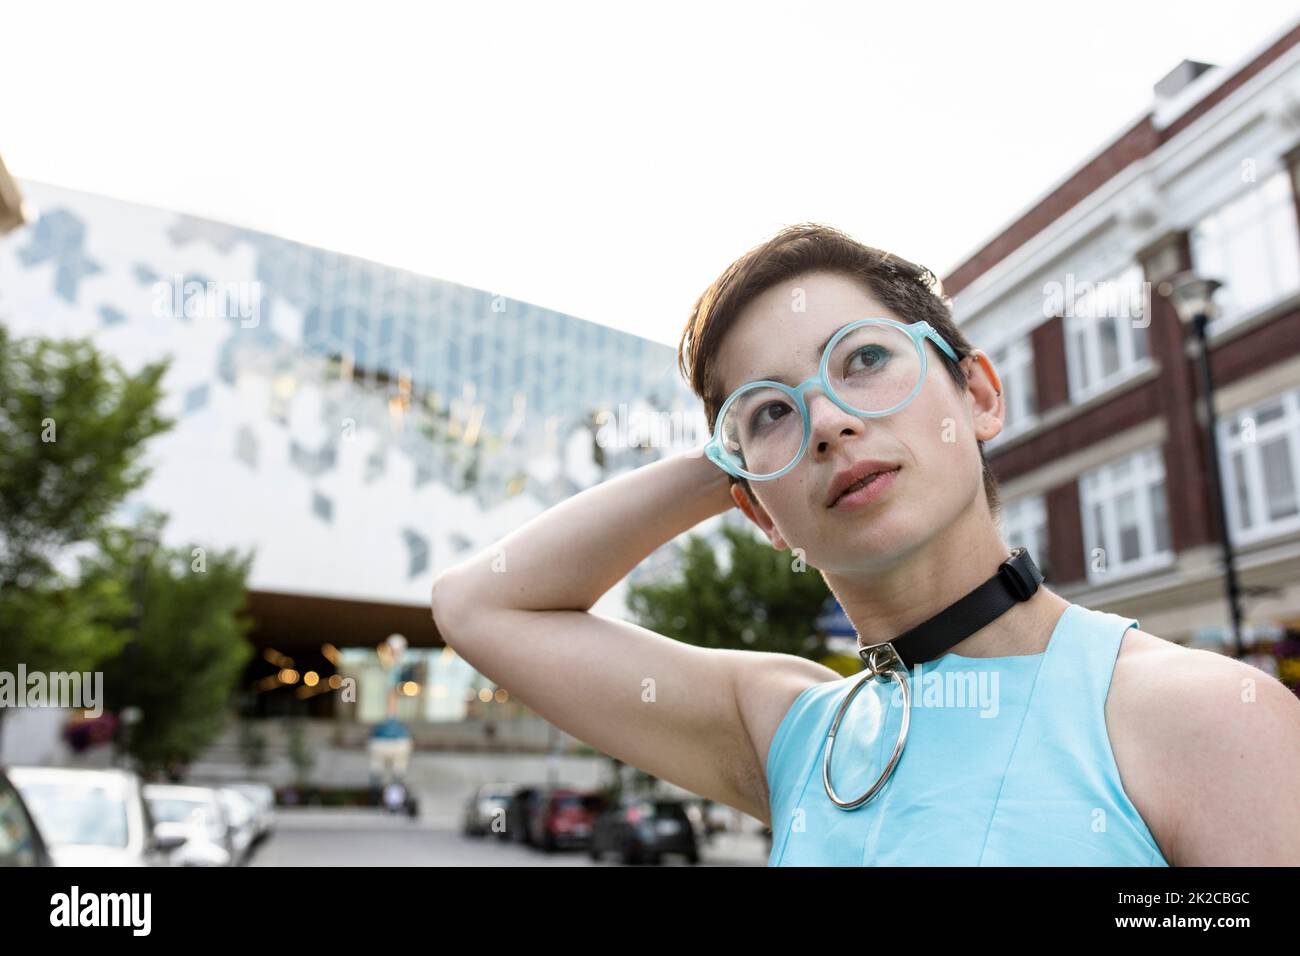 Portrait stylish non-binary young adult with short hair and eyeglasses Stock Photo